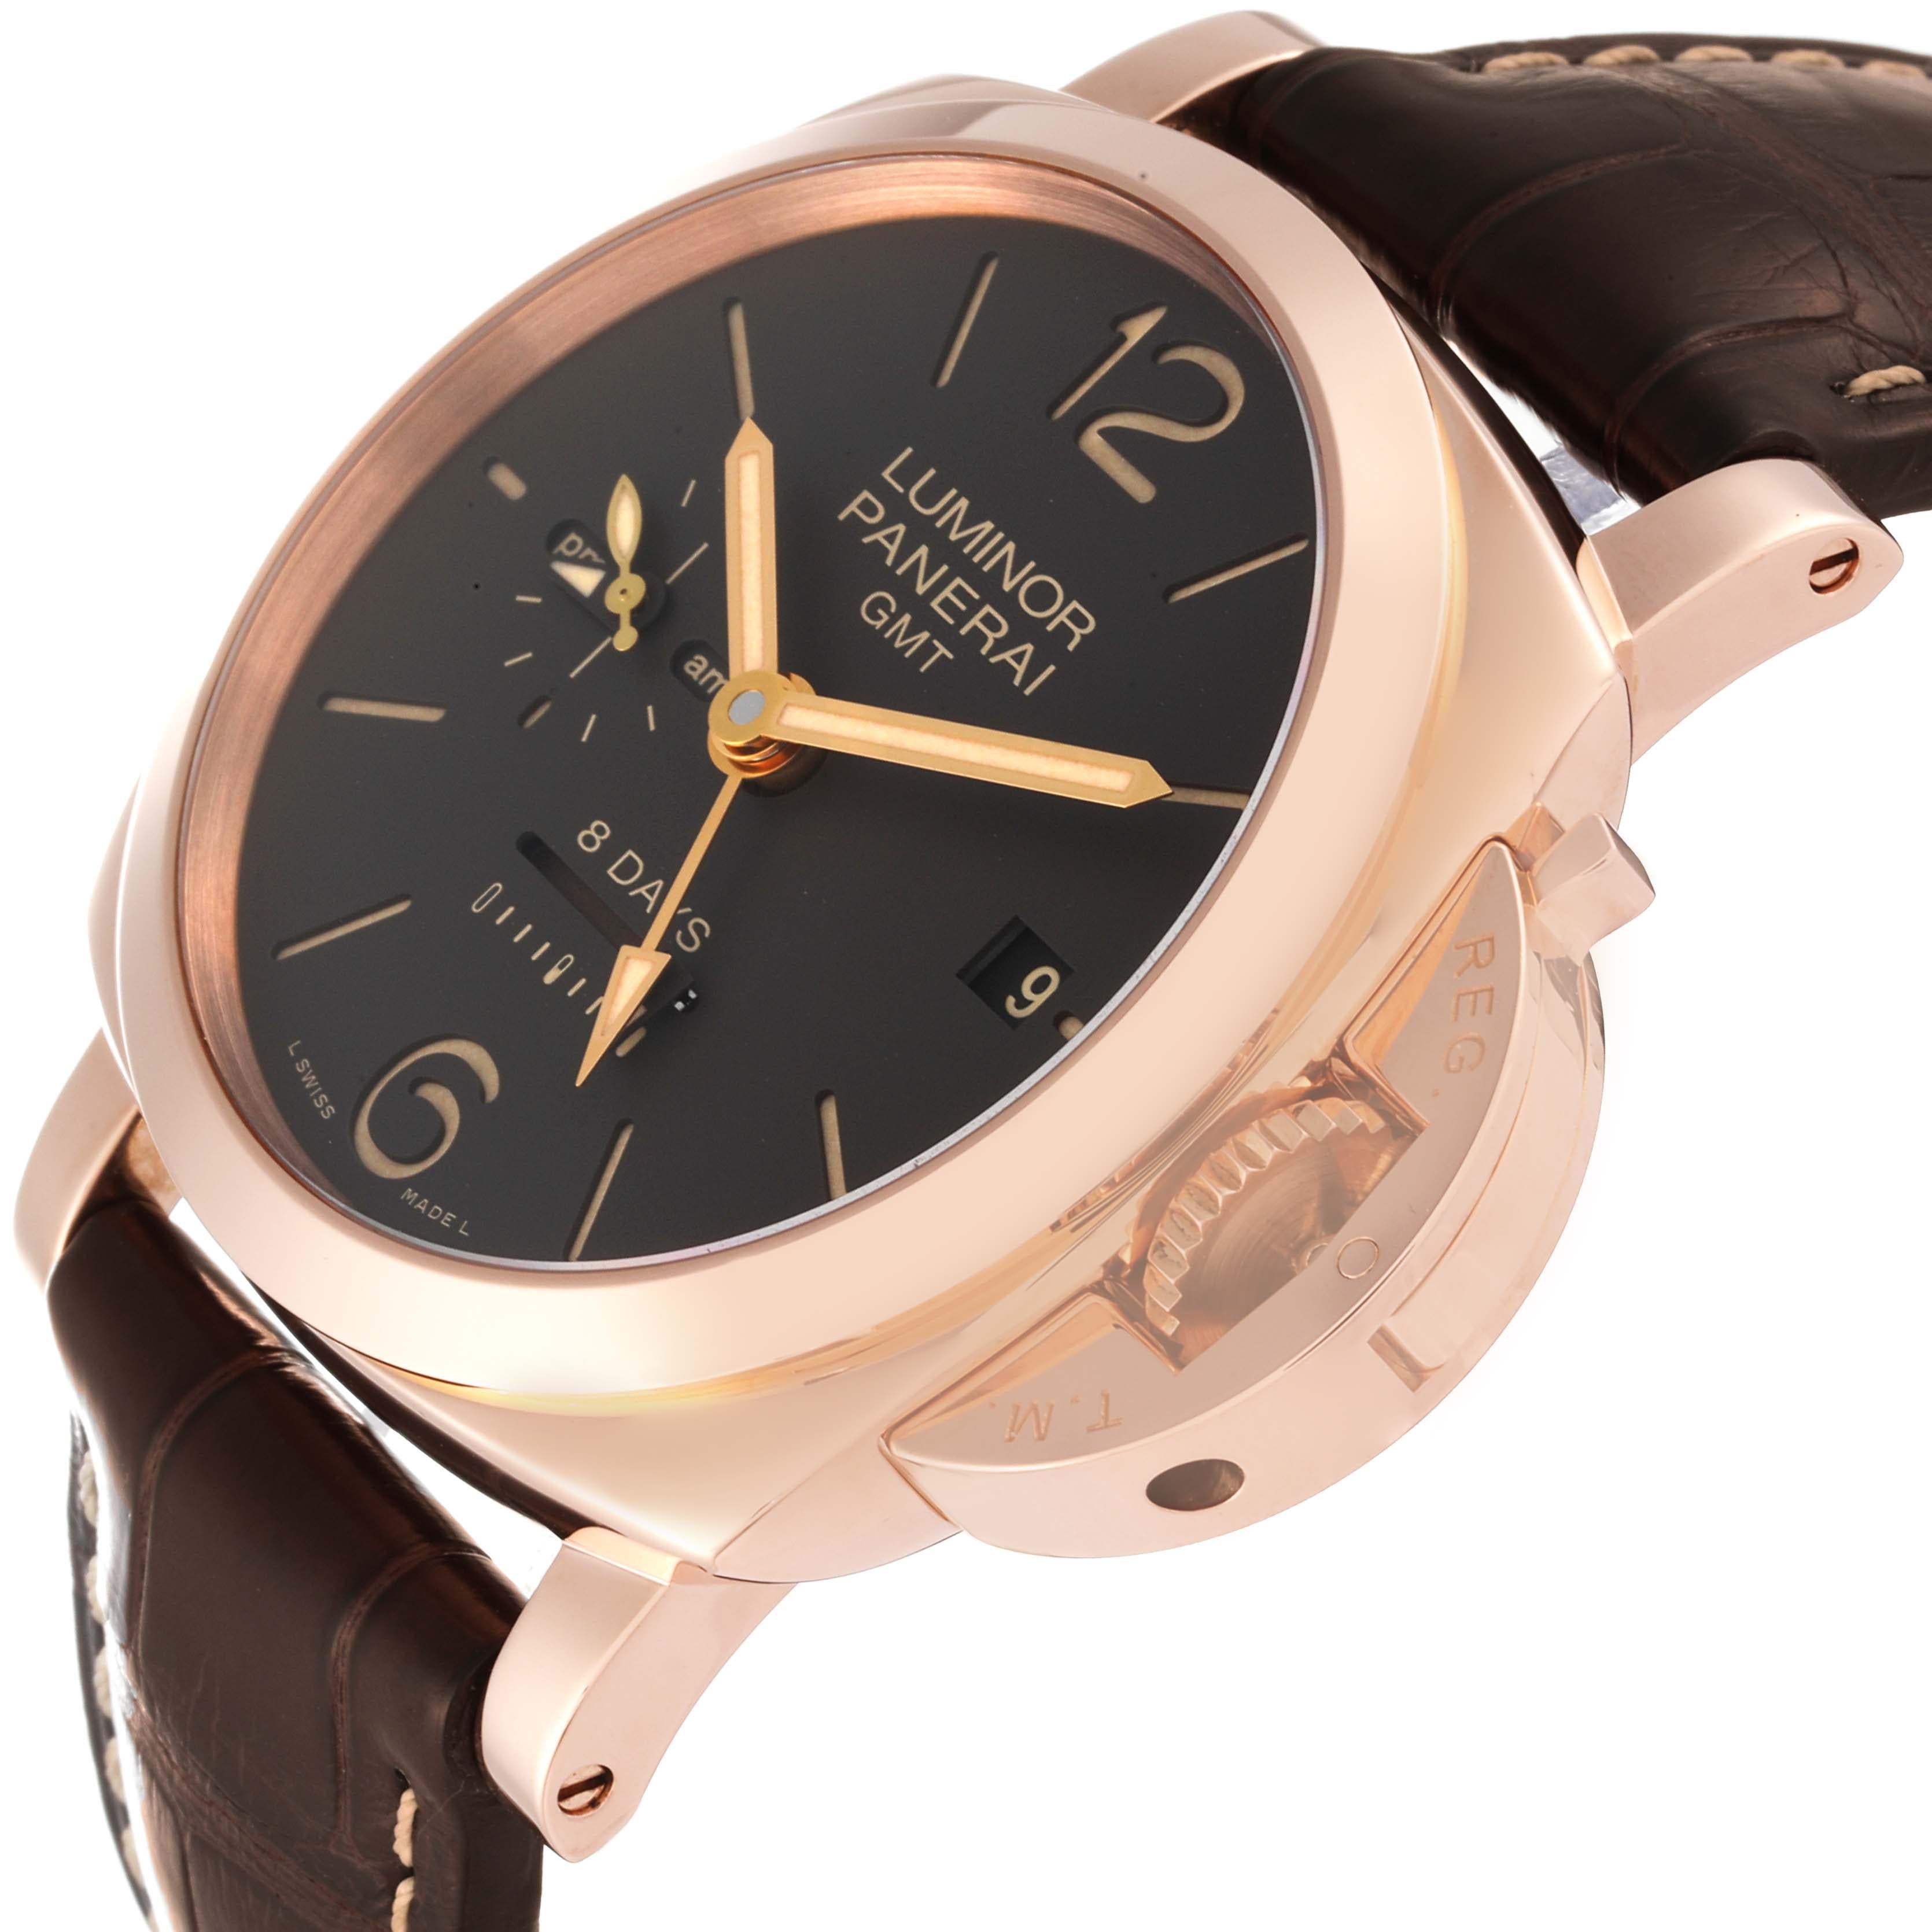 Men's Panerai Luminor 1950 8 Days GMT Rose Gold Mens Watch PAM00576 Papers For Sale